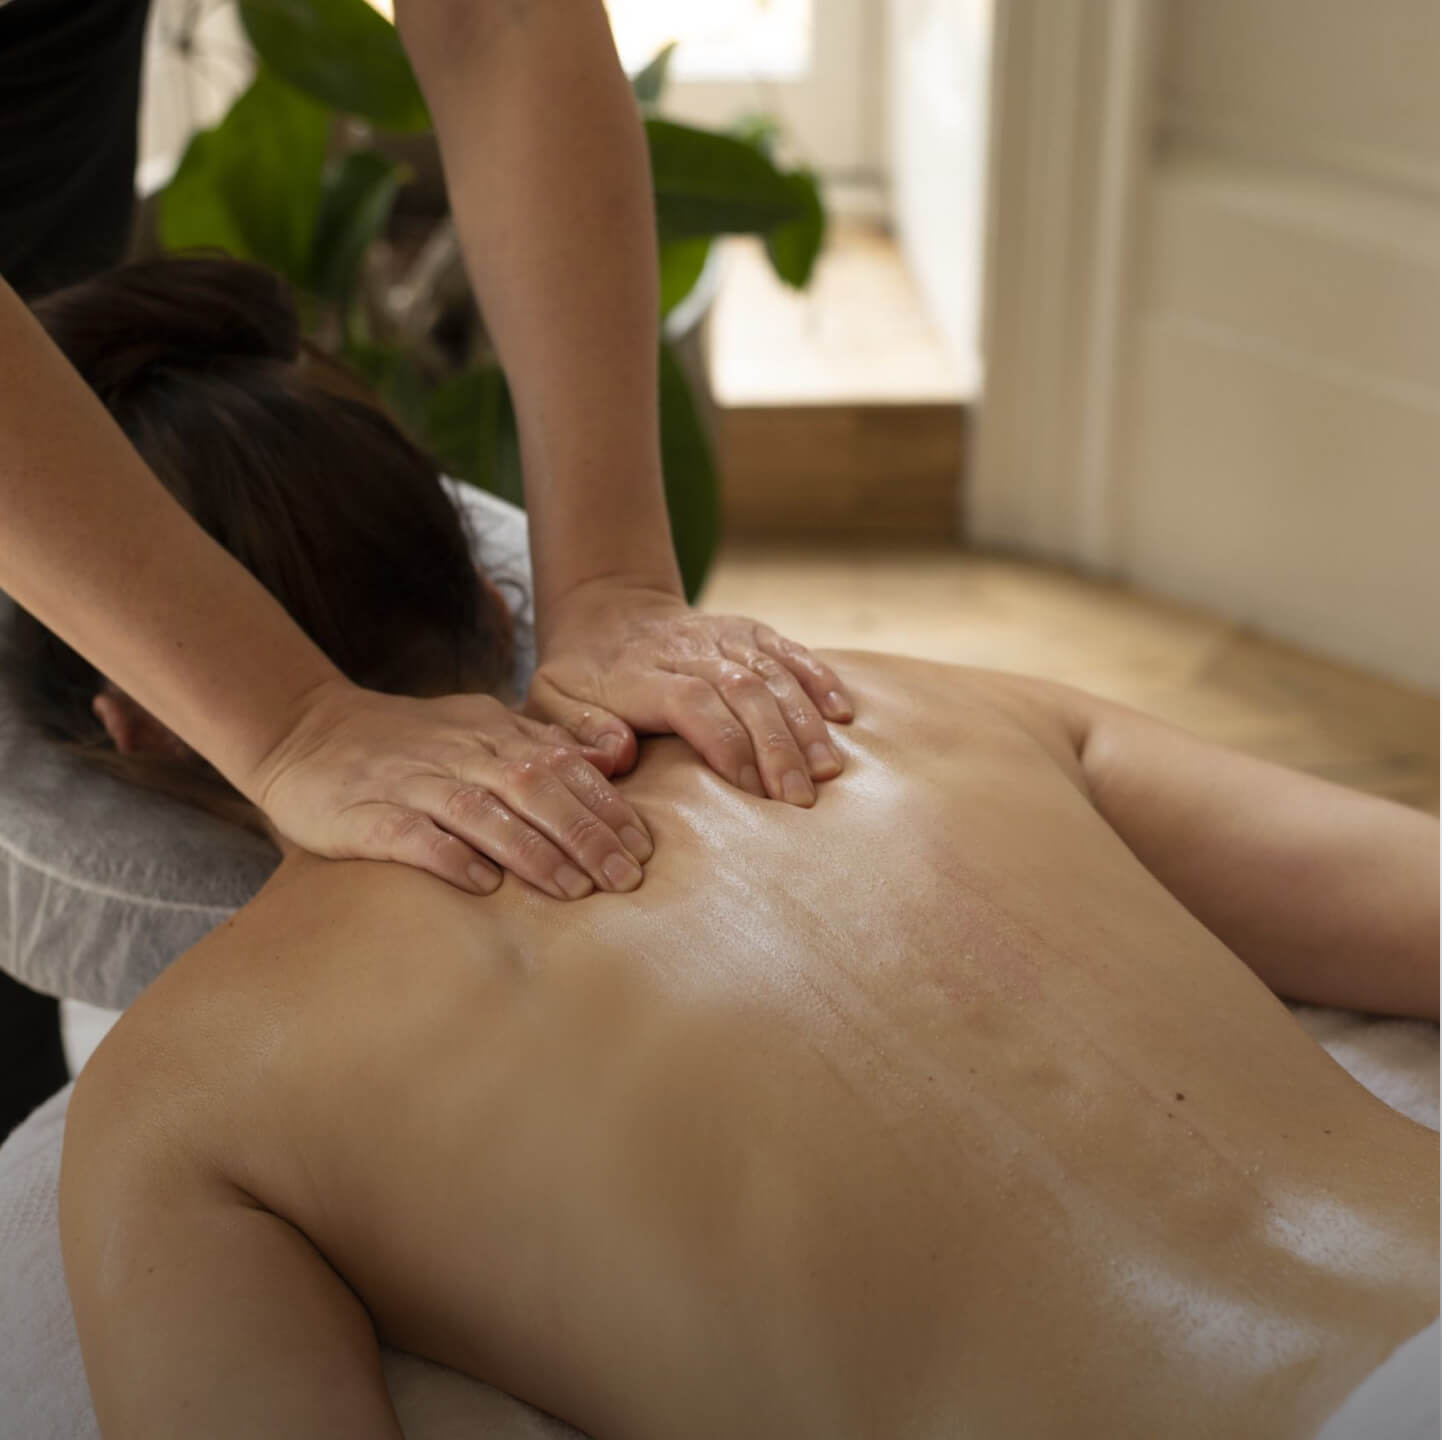 Image of a woman getting a massage at home